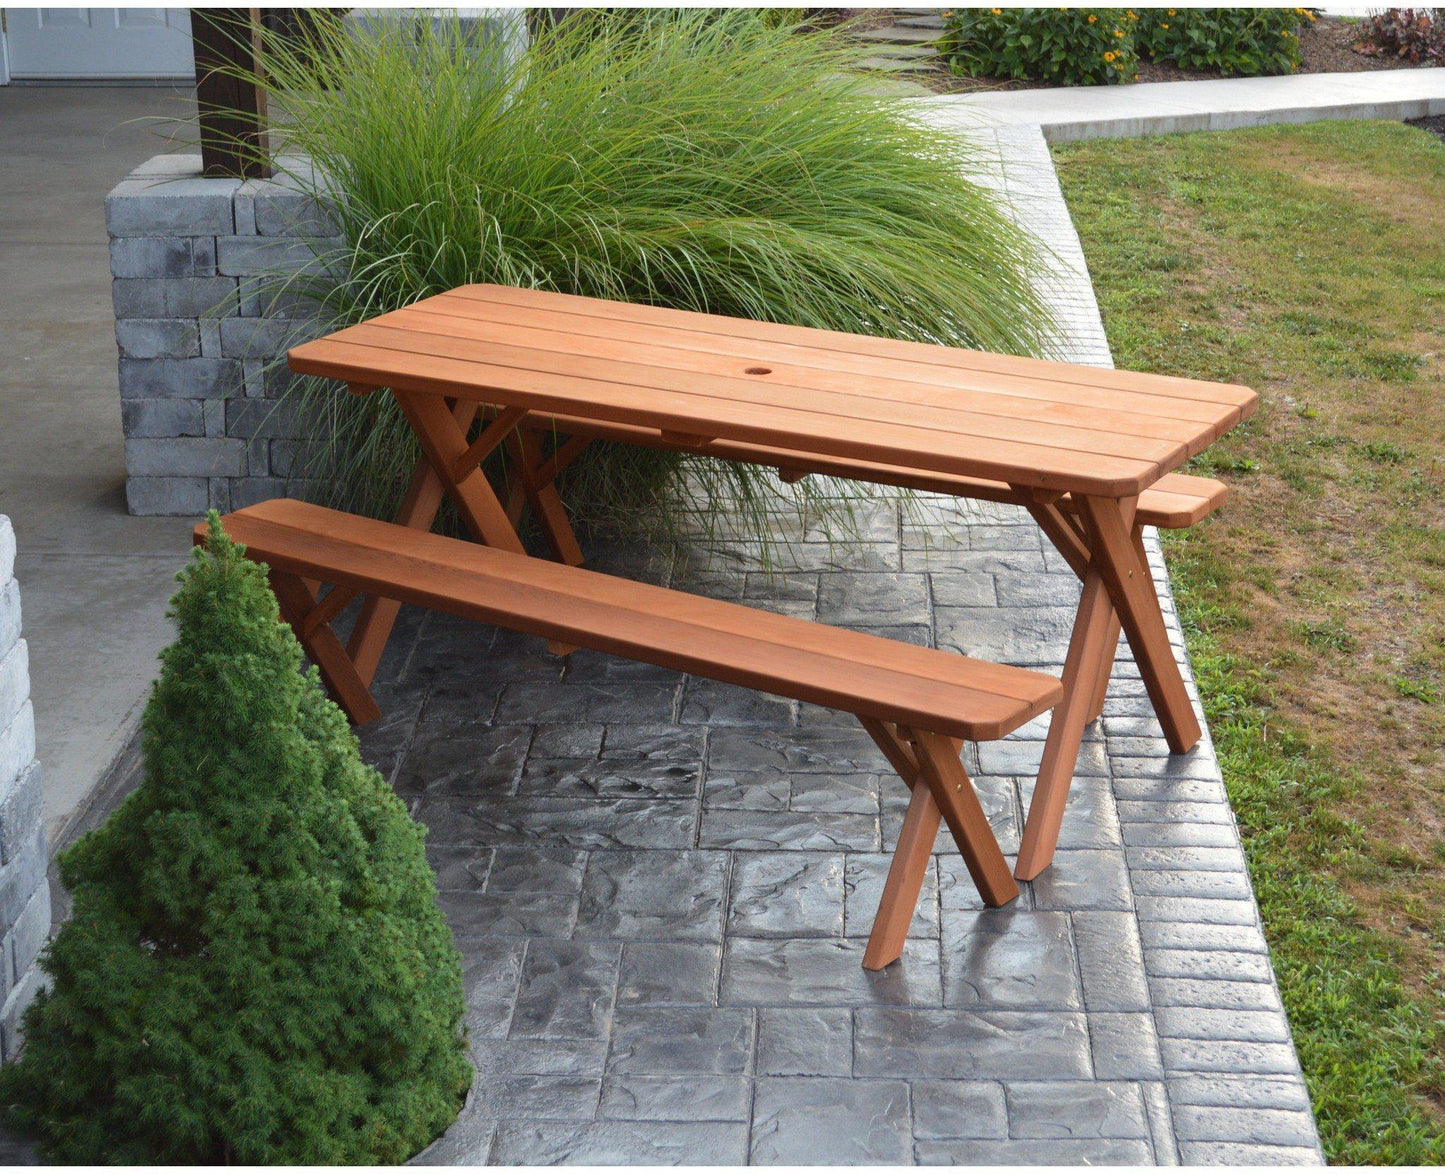 A & L FURNITURE CO. Western Red Cedar 8' Cross-leg Table w/2 Benches - Specify for FREE 2" Umbrella Hole  - Ships FREE in 5-7 Business days - Rocking Furniture